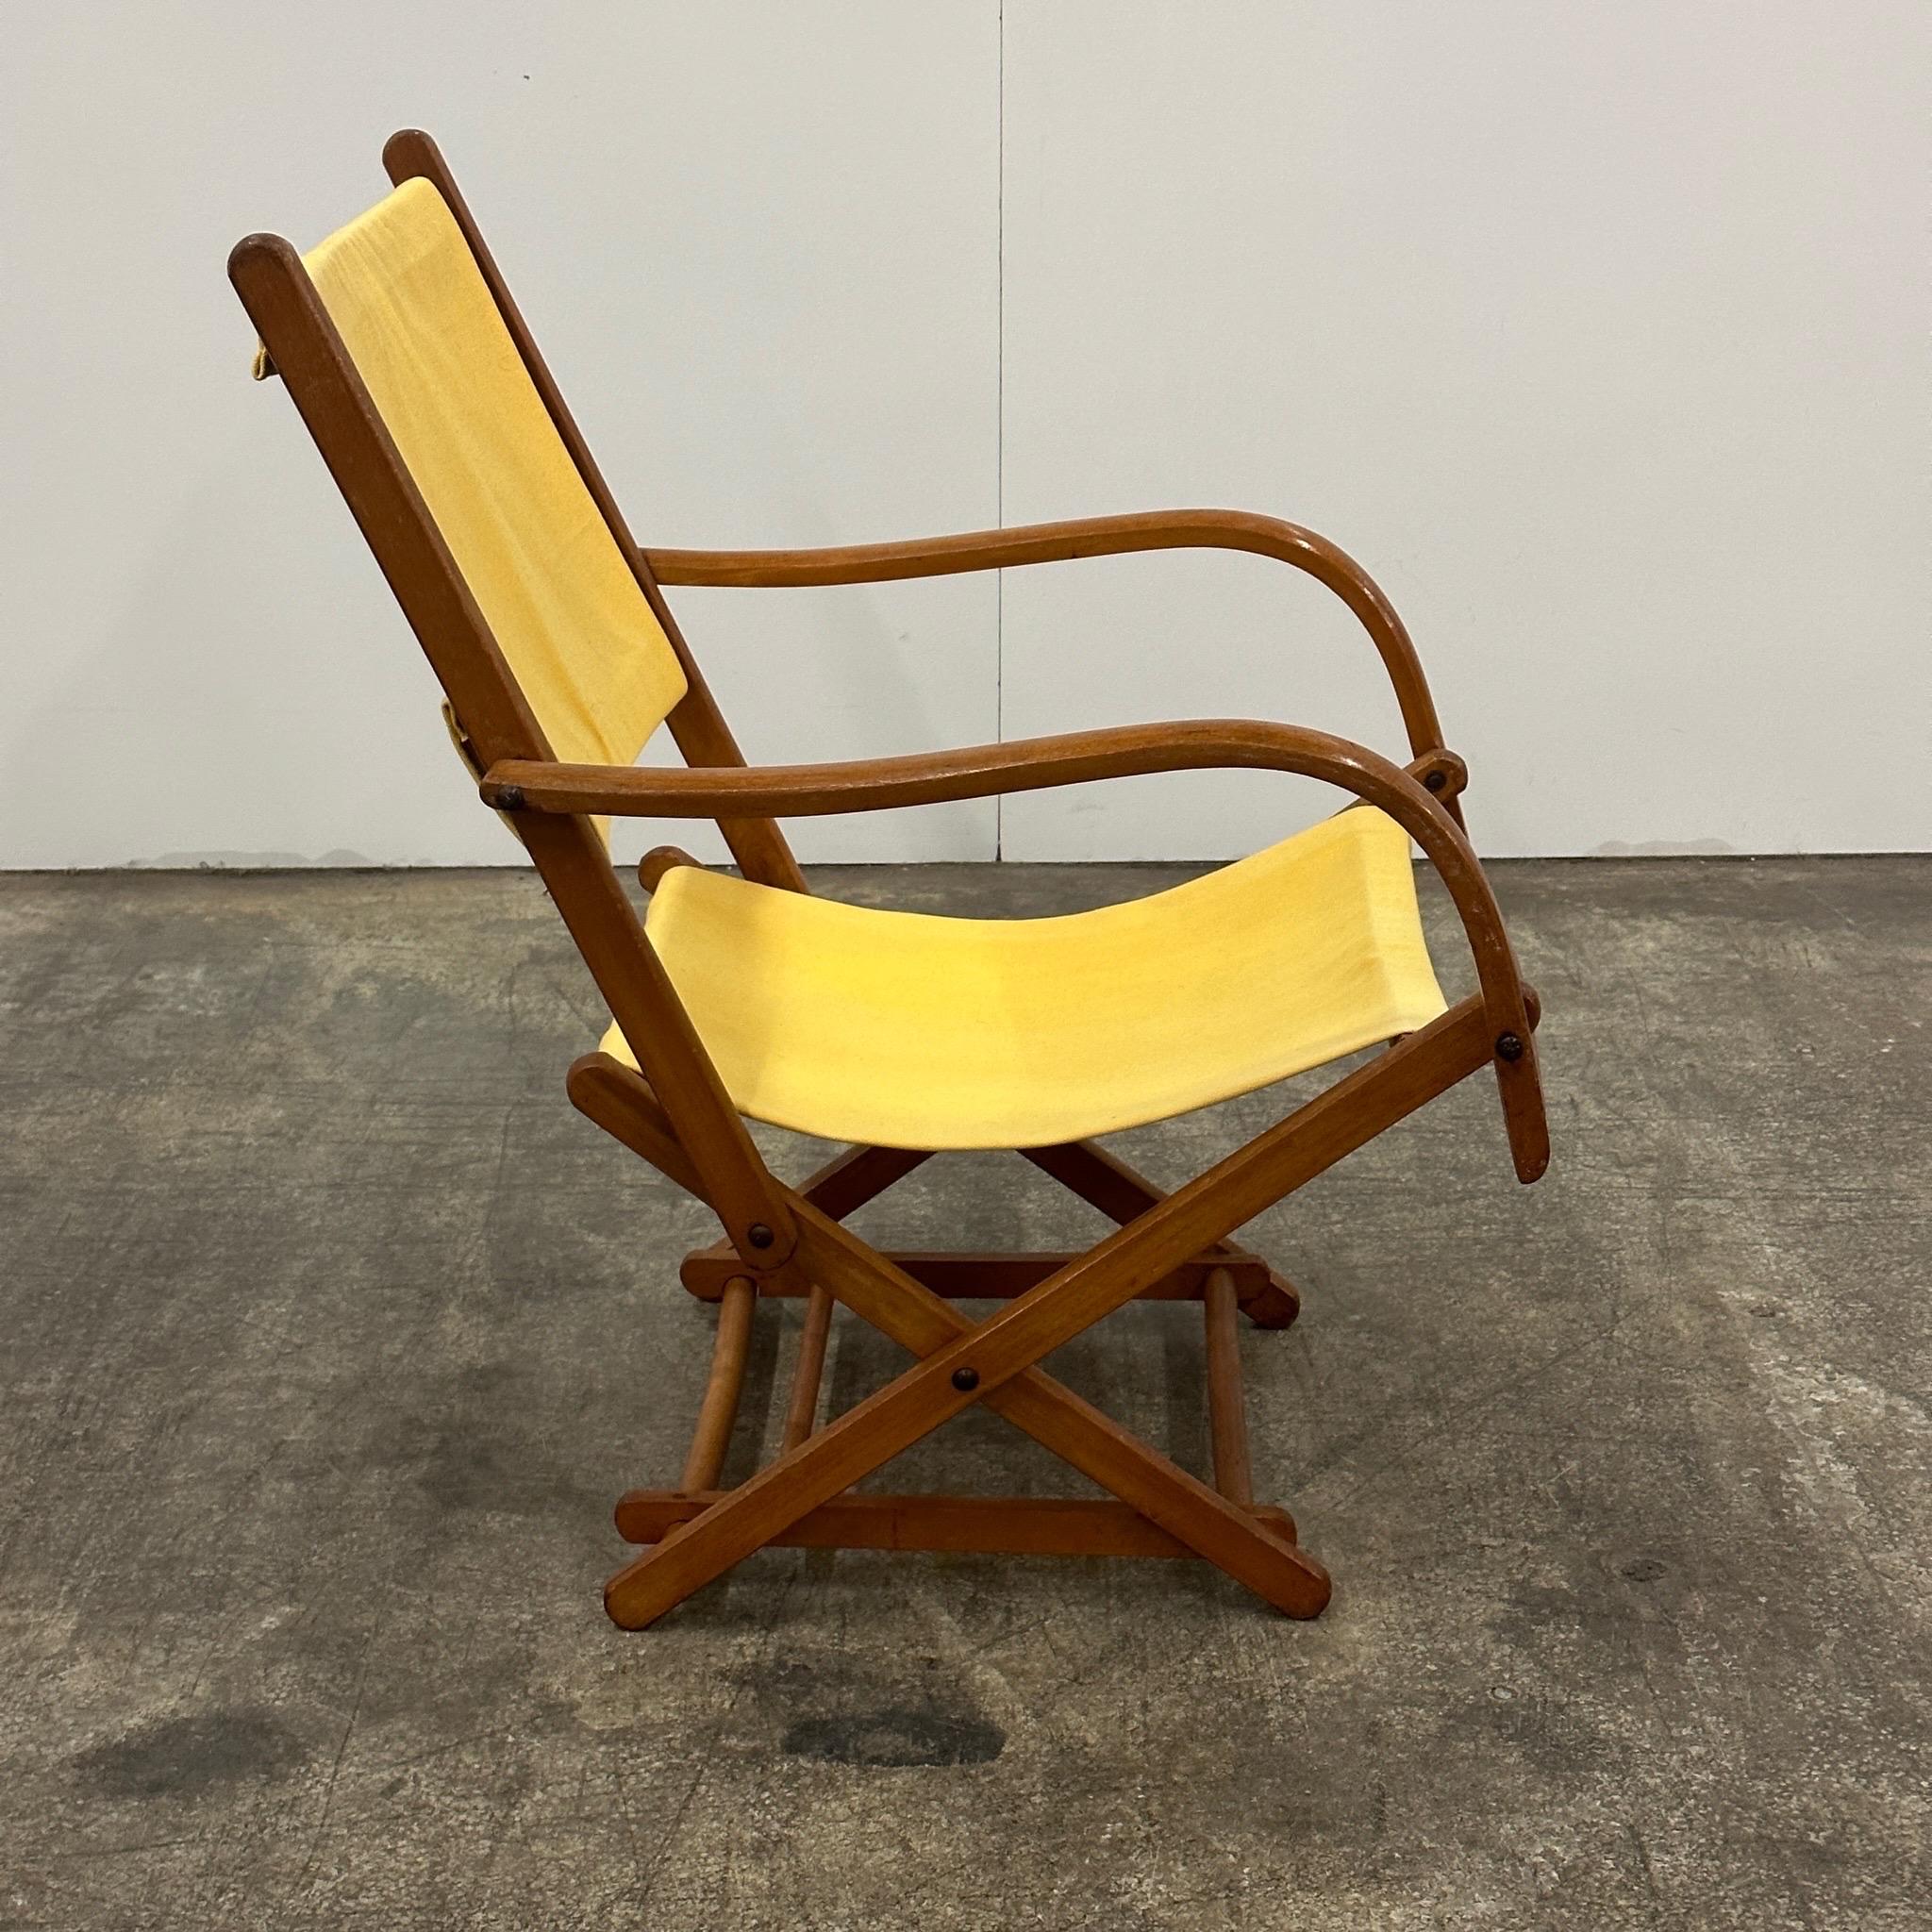 Mid-20th Century Vintage Danish Folding Chair by Torck